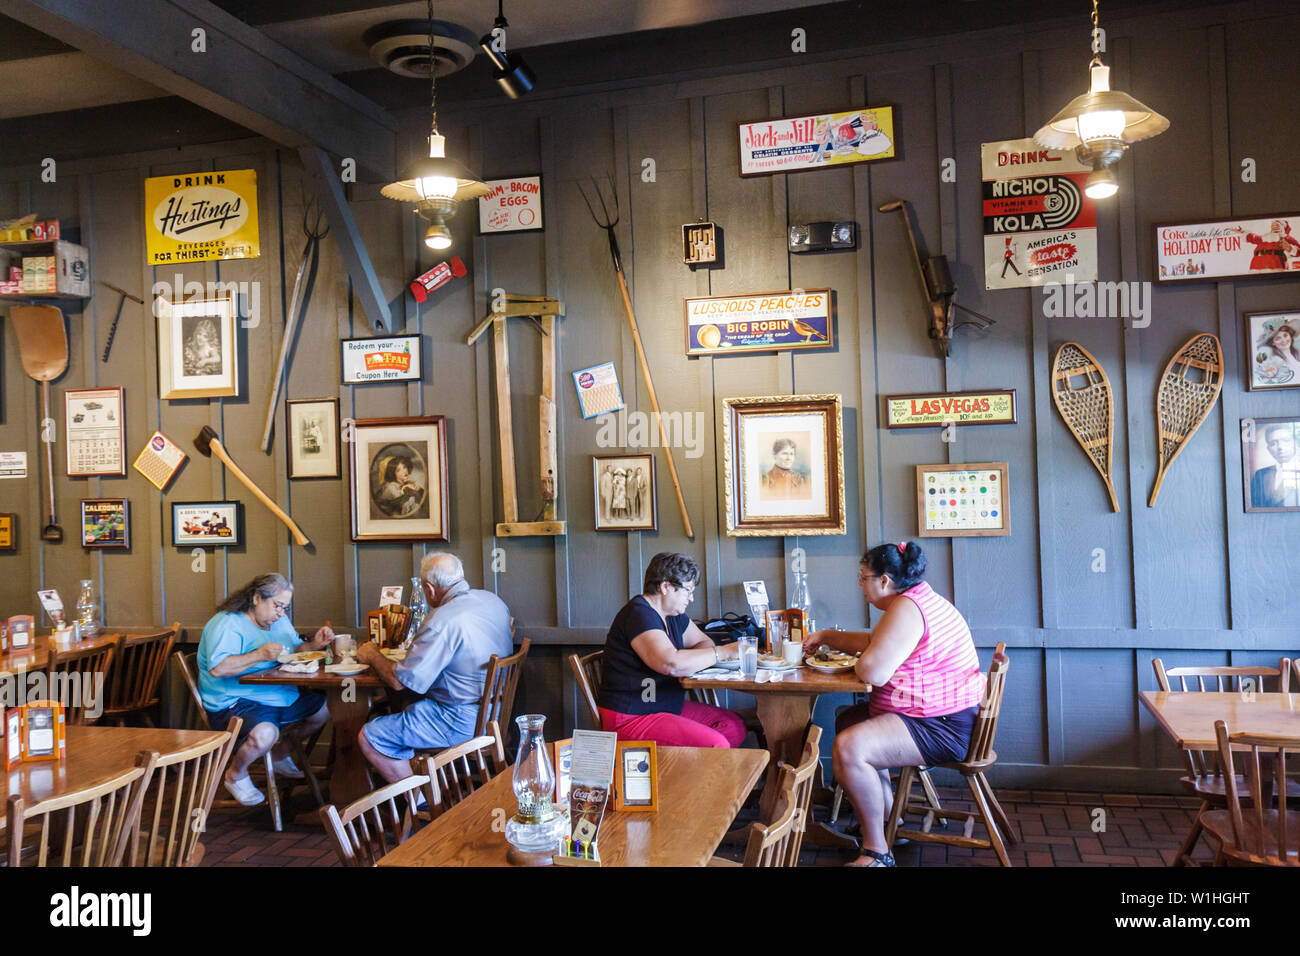 Florida Indian River County,Vero Beach,Cracker Barrel Old Country Store,restaurant restaurants food dining cafe cafes,service,cuisine,chain,Southern t Stock Photo